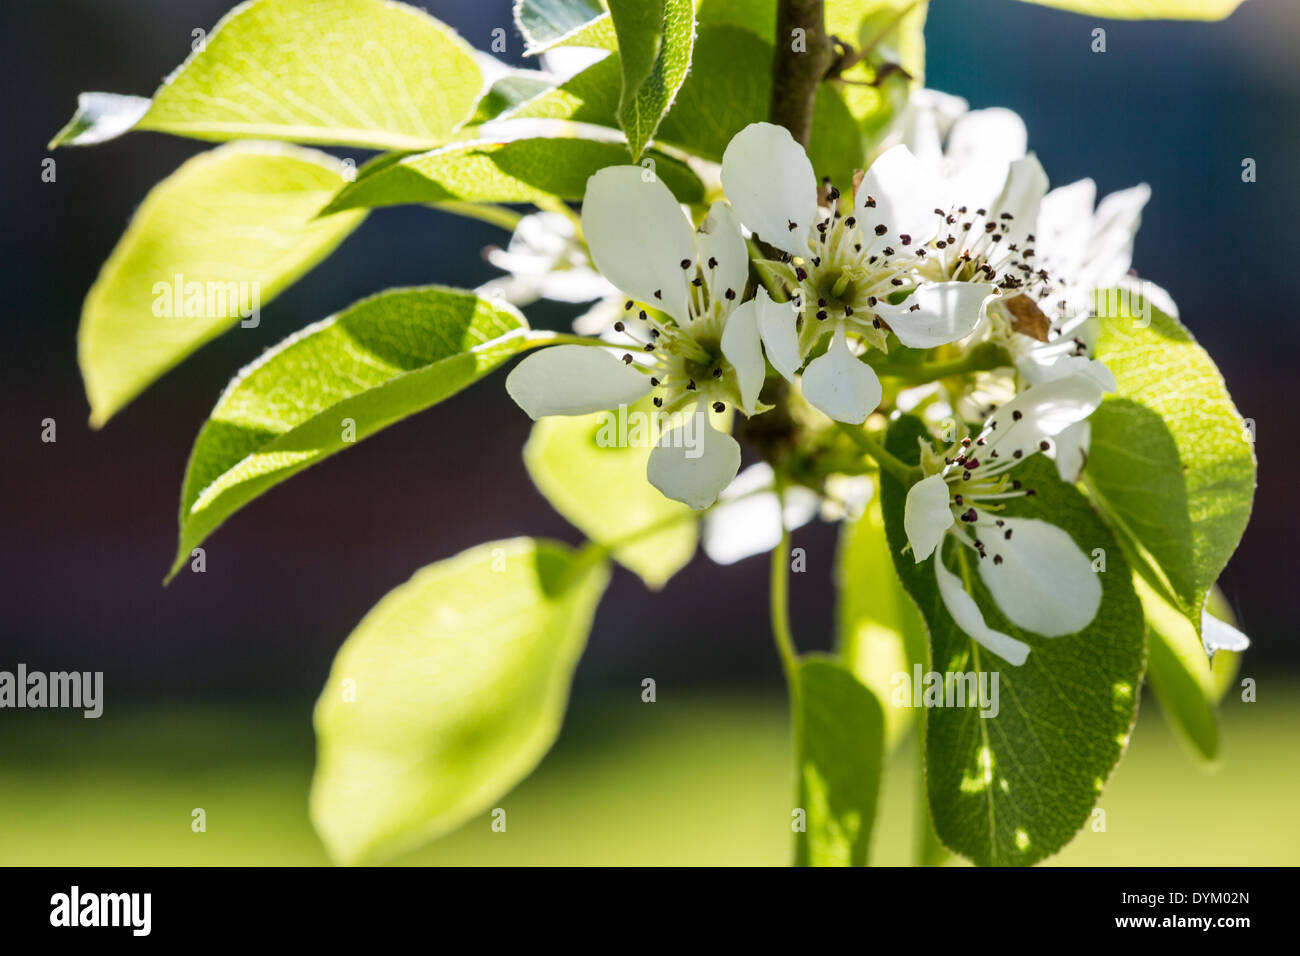 Plymouth pear flower (Pyrus, cordata) in spring sunshine Stock Photo